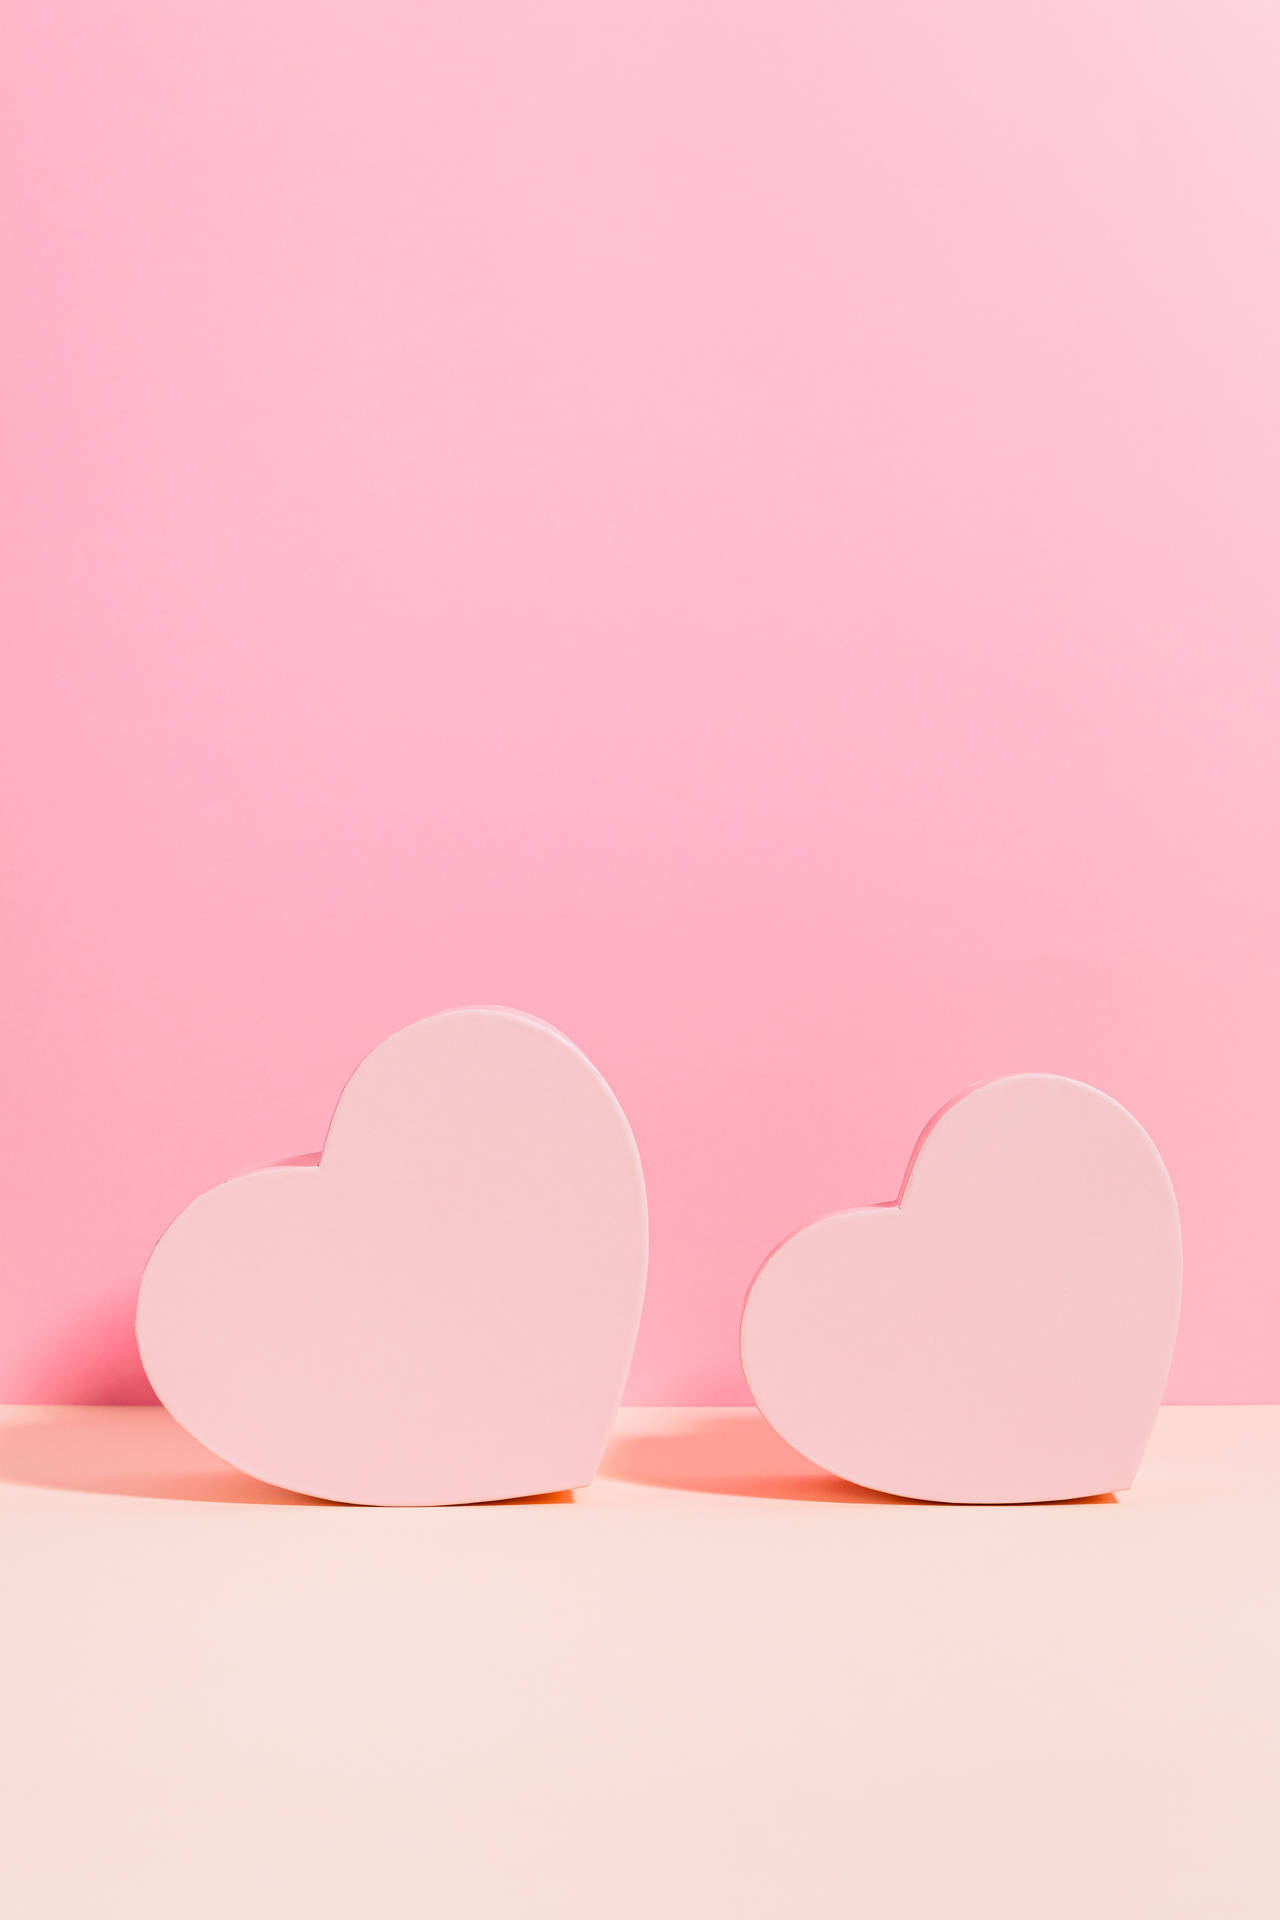 Pastel Pink Heart Boxes Background